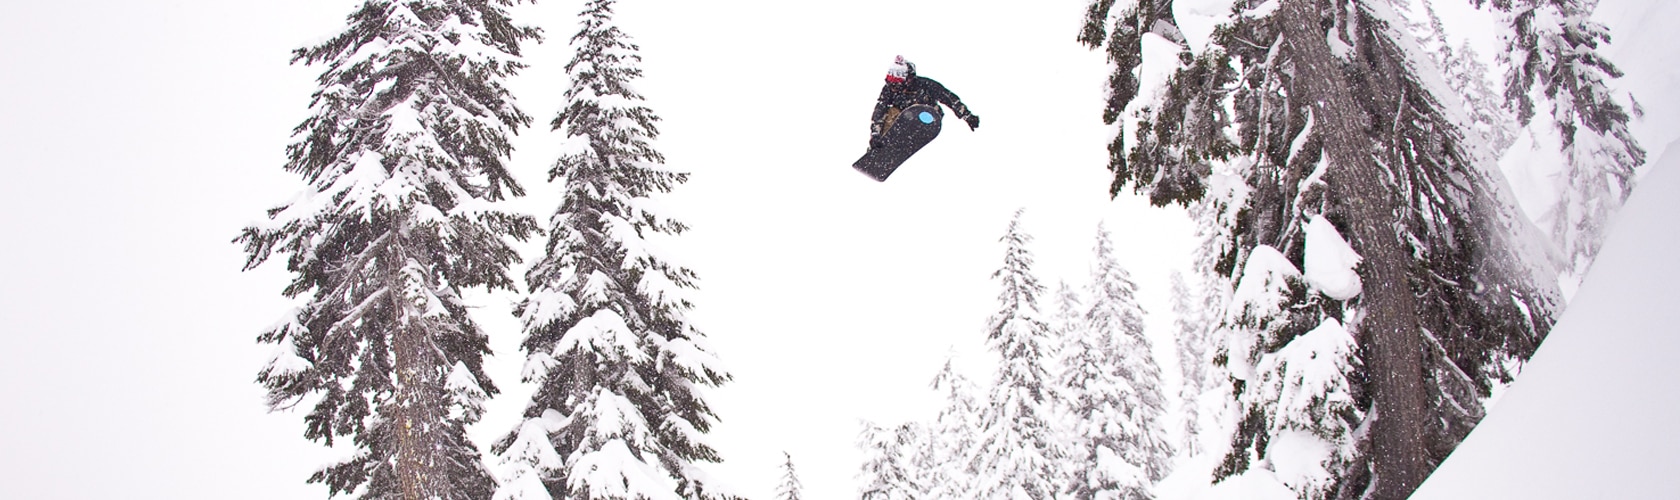 snowboarder getting huge air going down the snow covered mountain